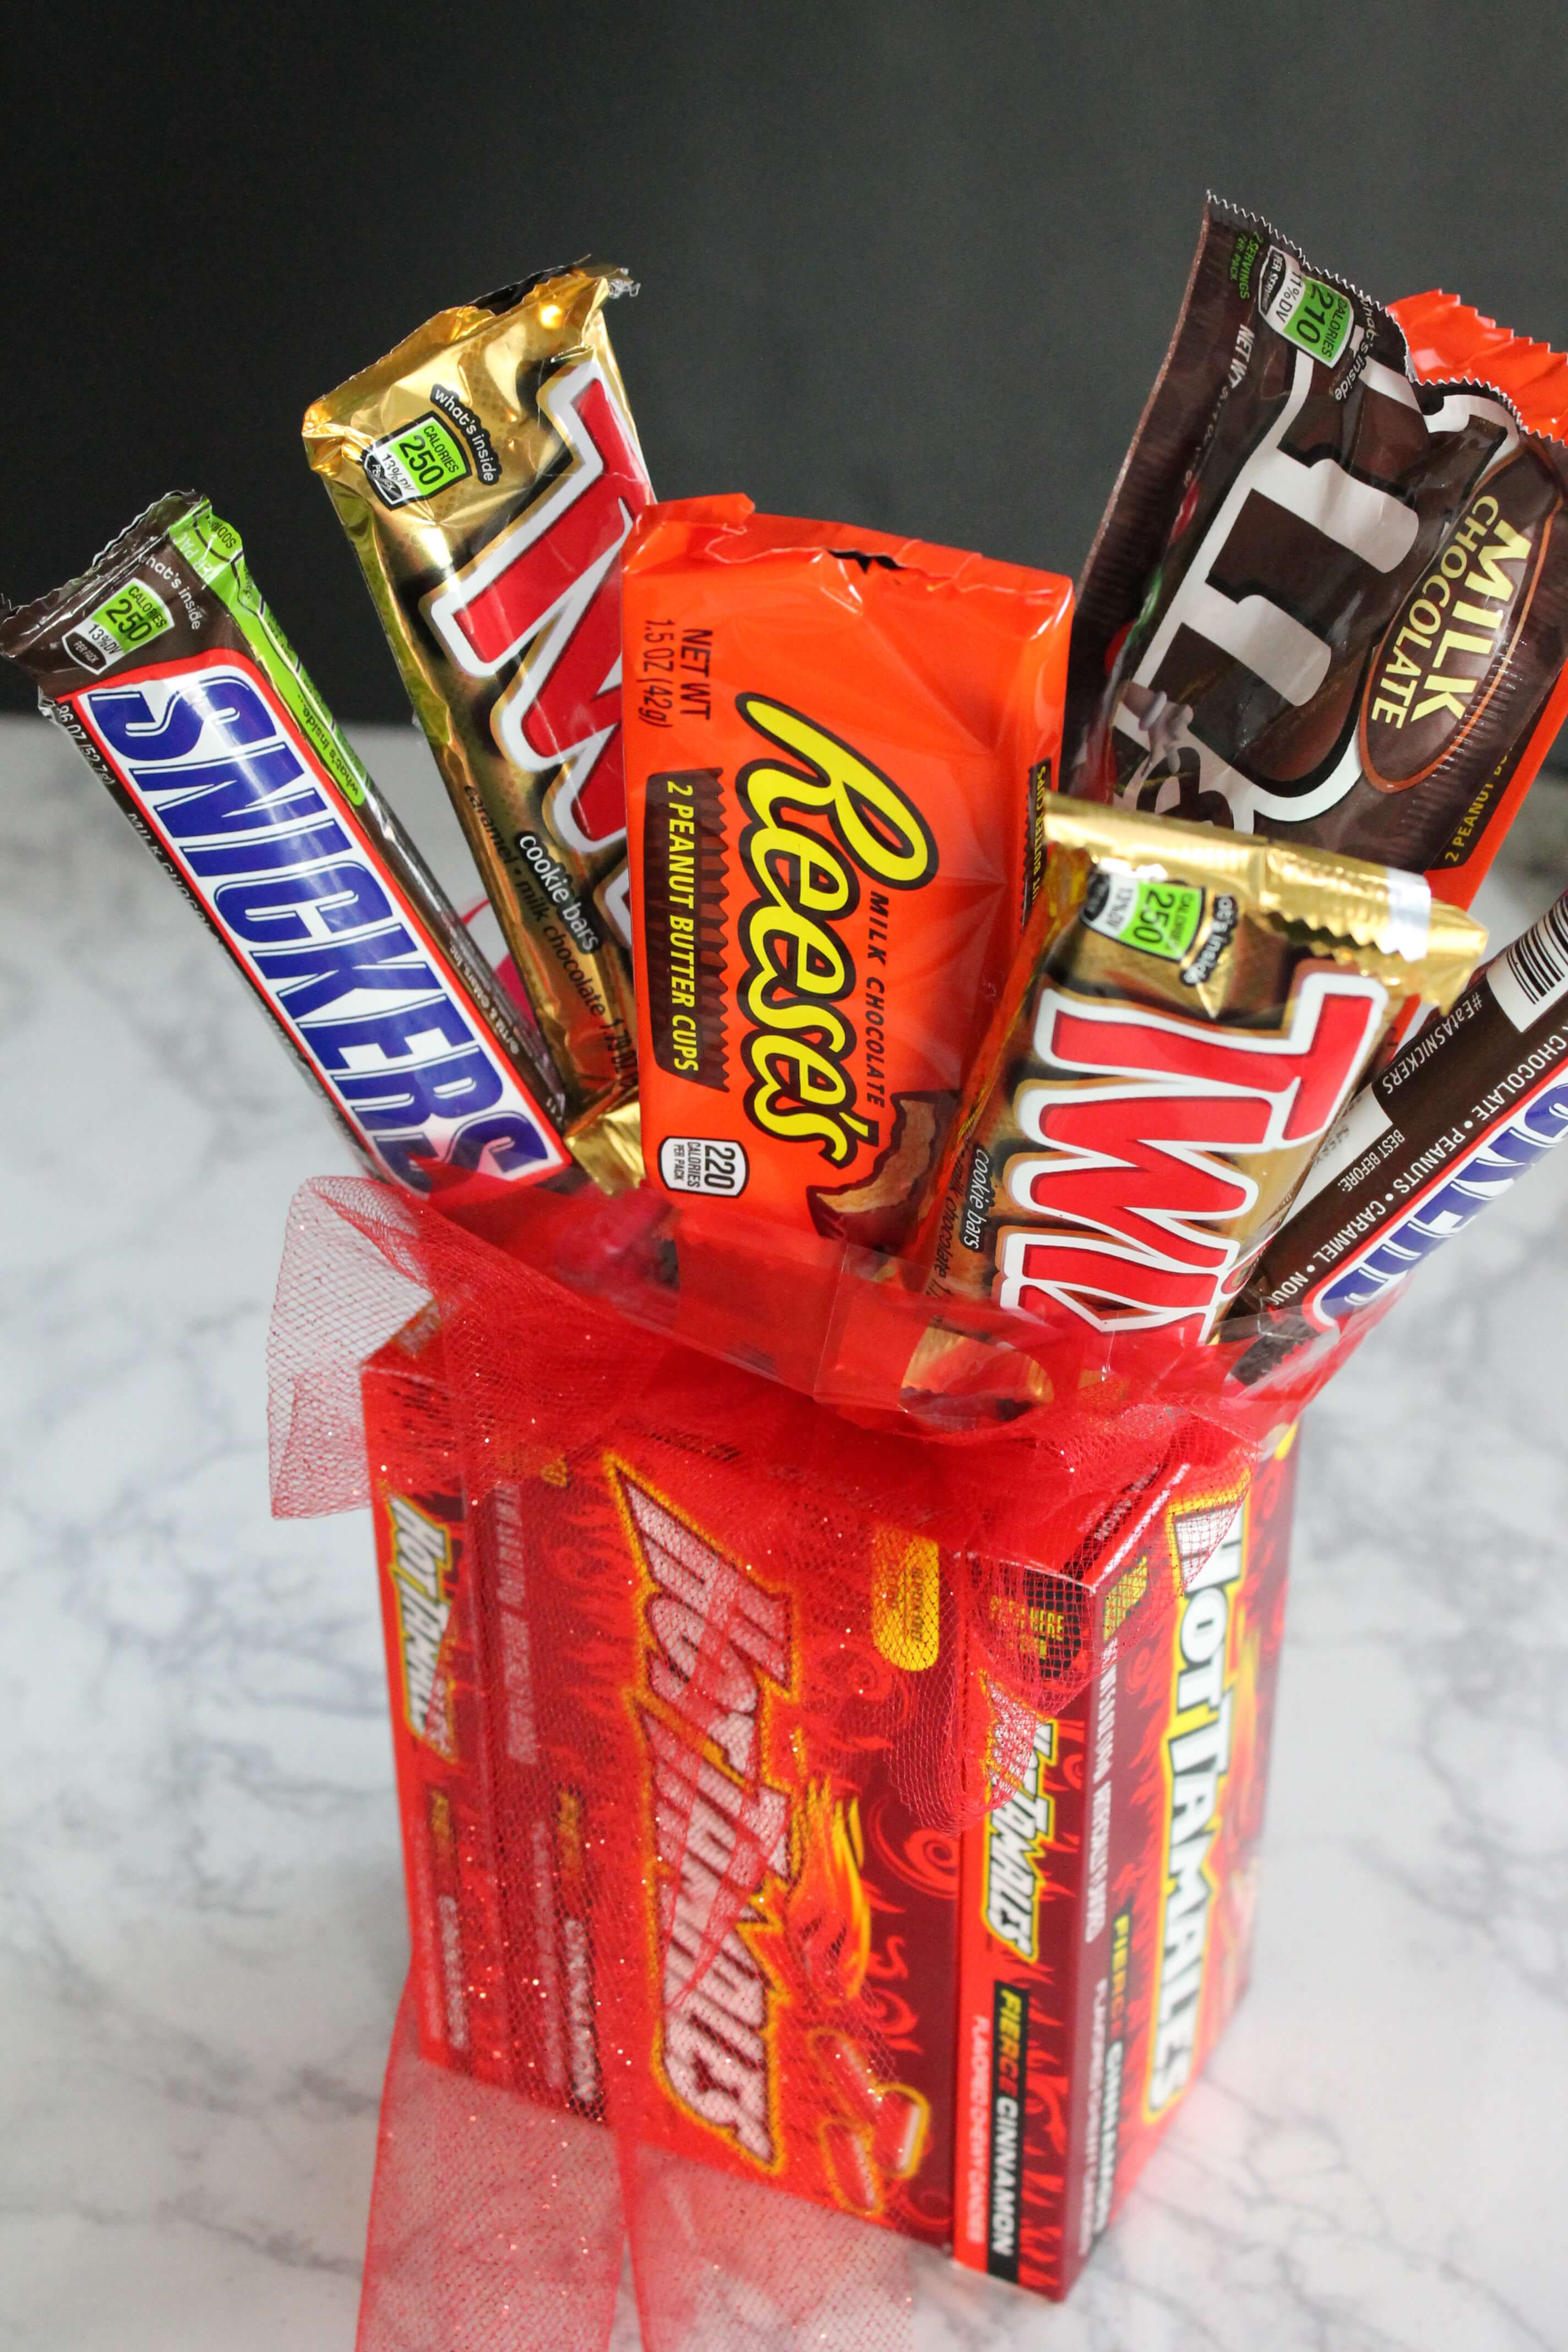 Celebrate With These 20 DIY Candy Bouquets! – OBSiGeN